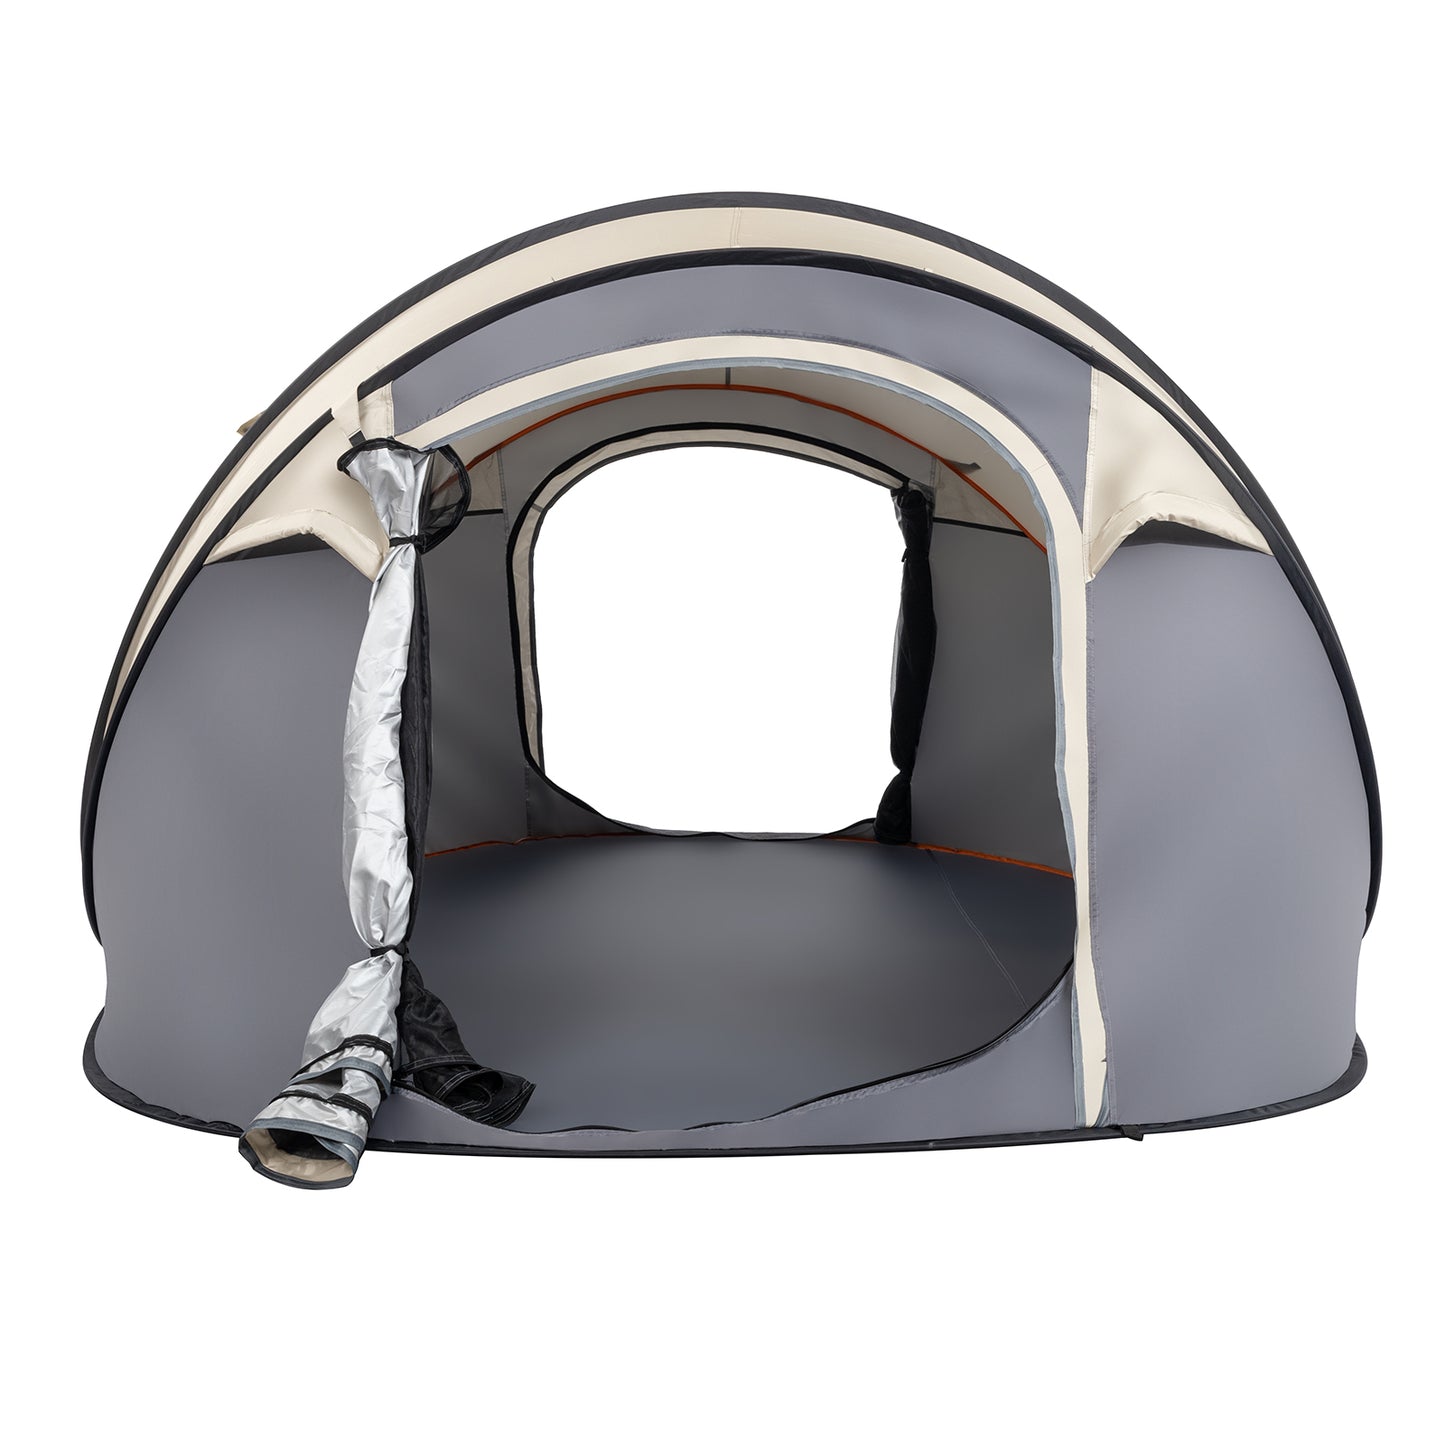 Camping Tent, 4 Person Pop Up,Easy Setup For Camping